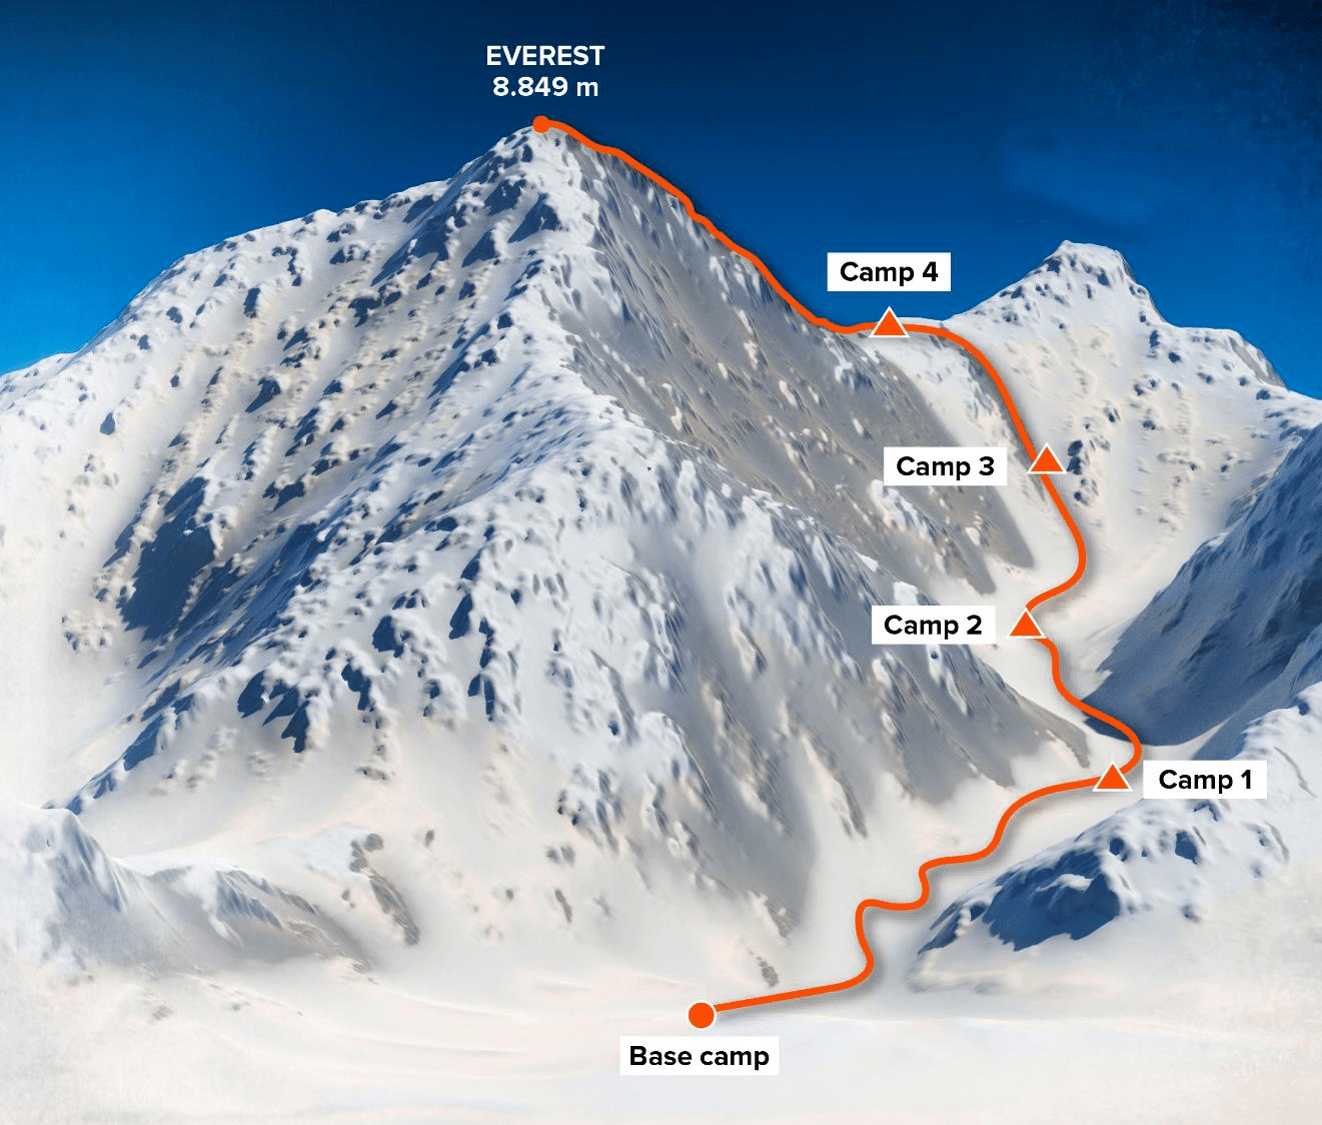 An image of the trail to climb Mount Everest, from camps 1-4